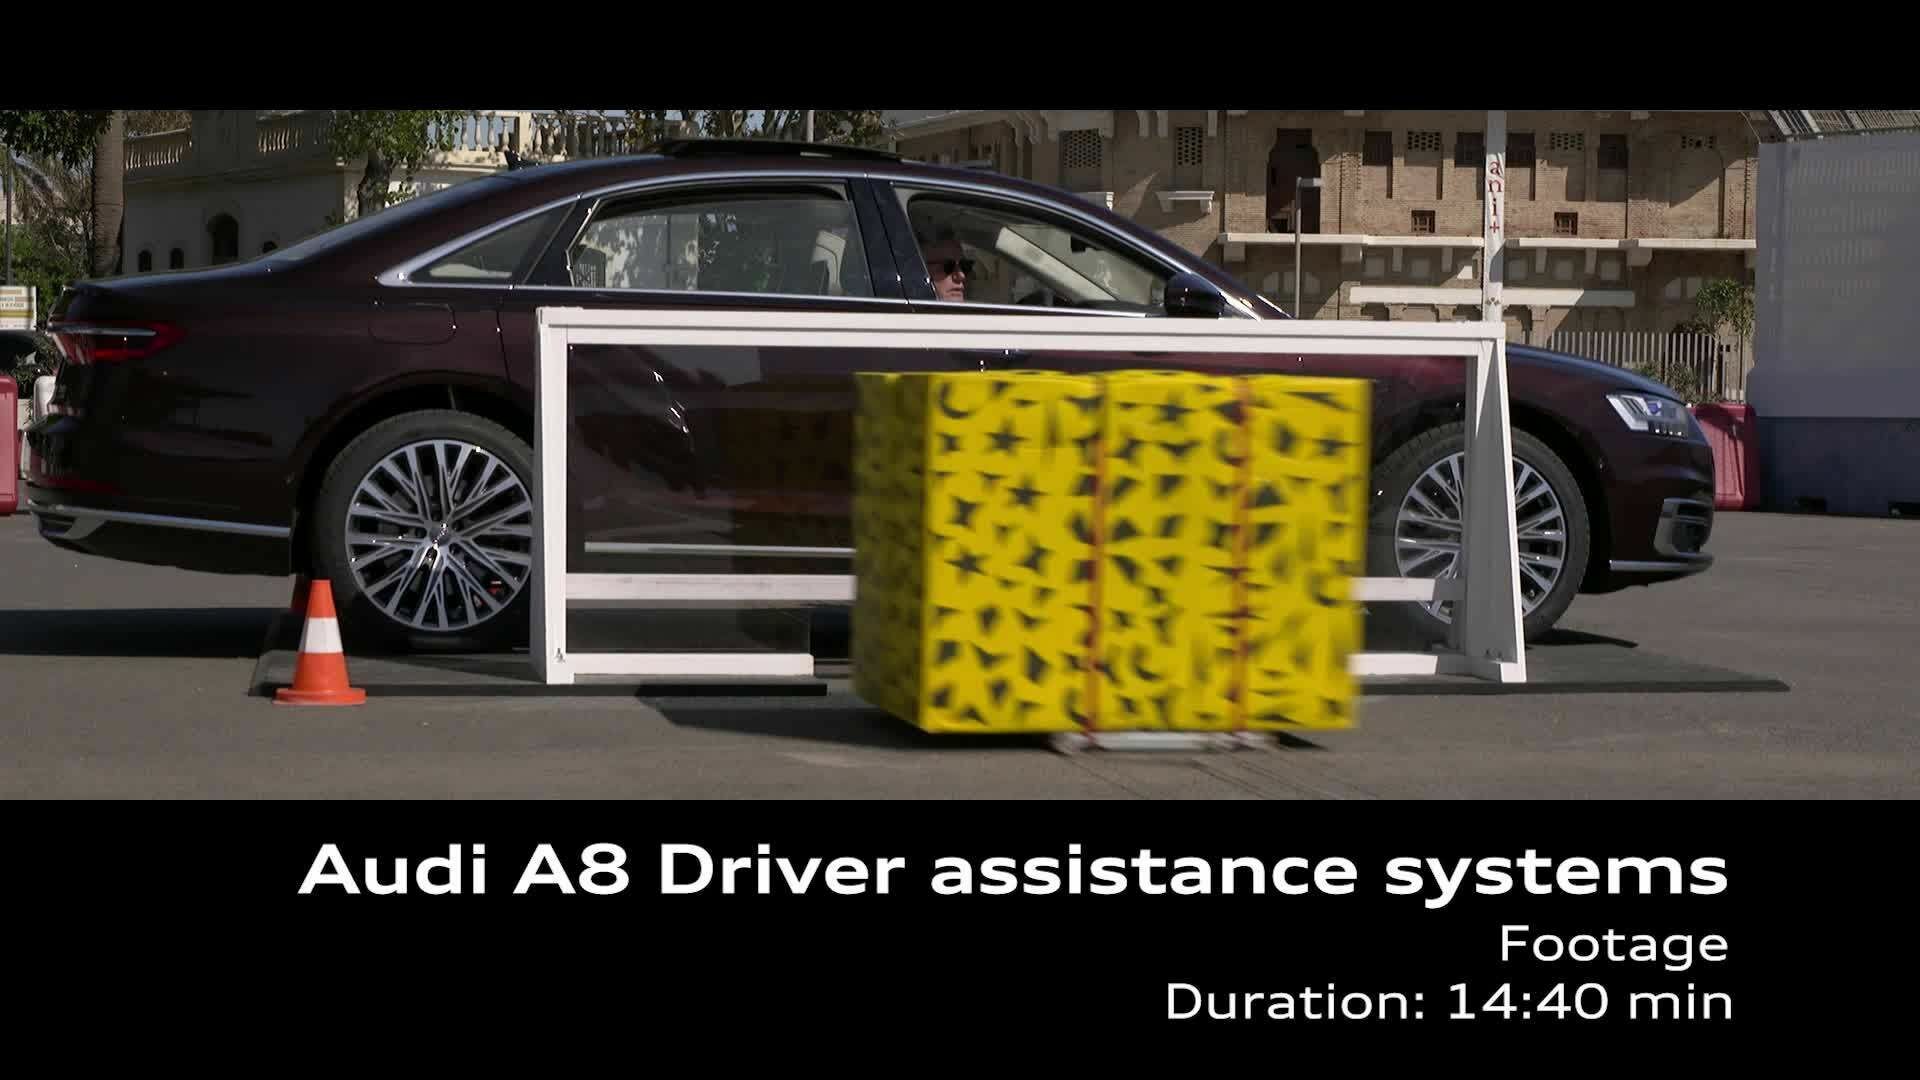 Footage Audi A8 driver assistance systems